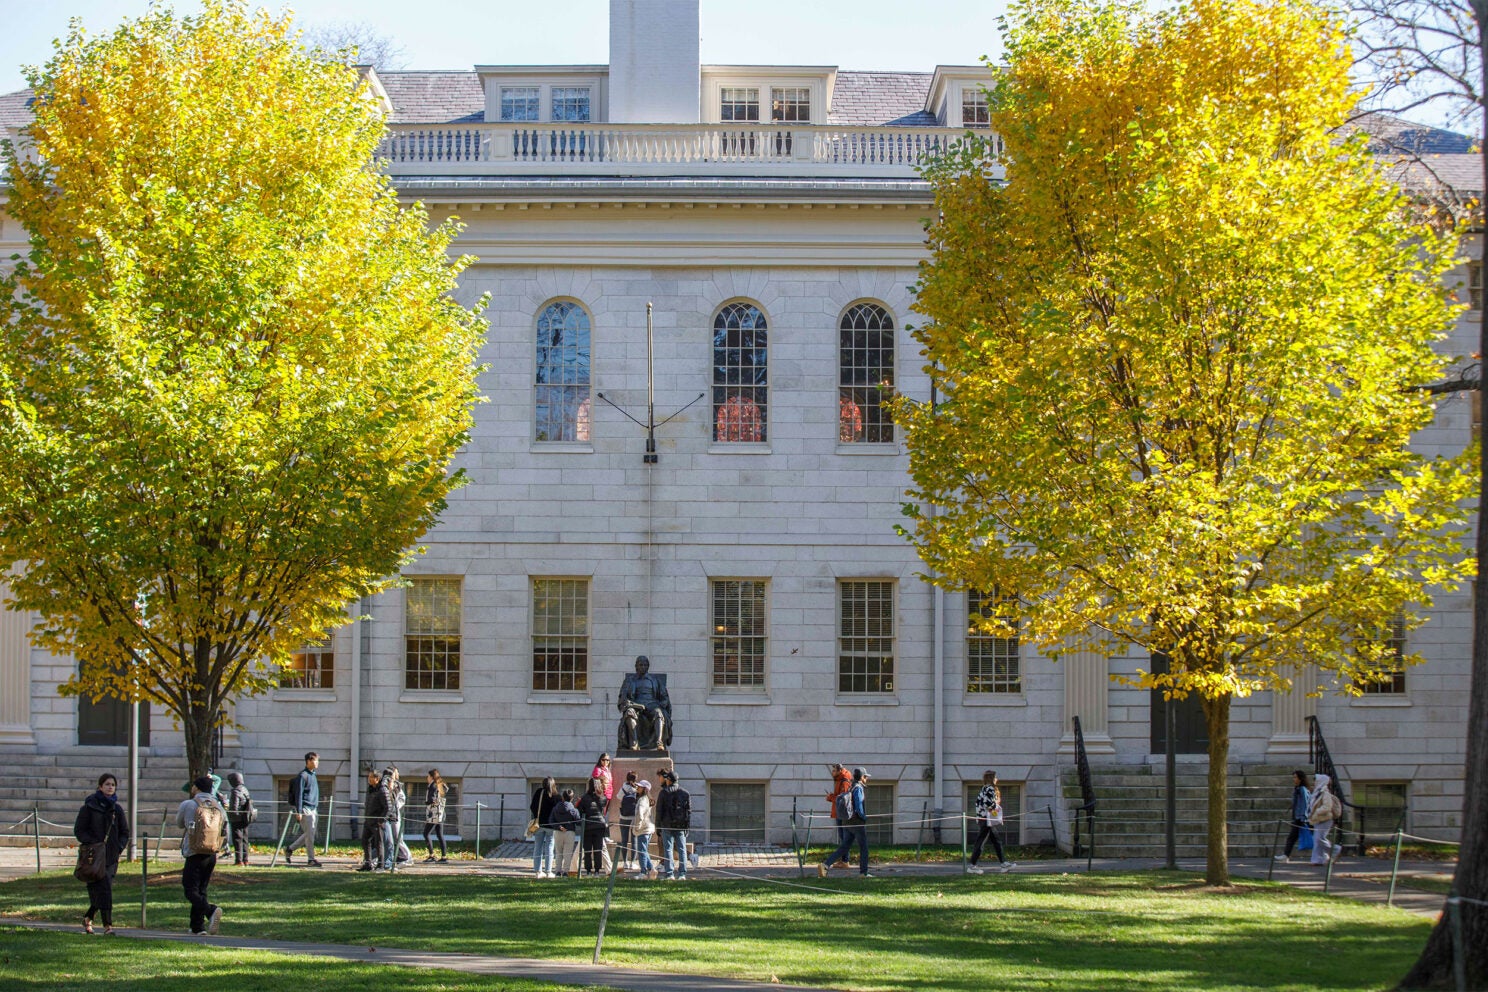 The John Harvard Statue and University Hall is flanked by Fall foliage during Autumn.